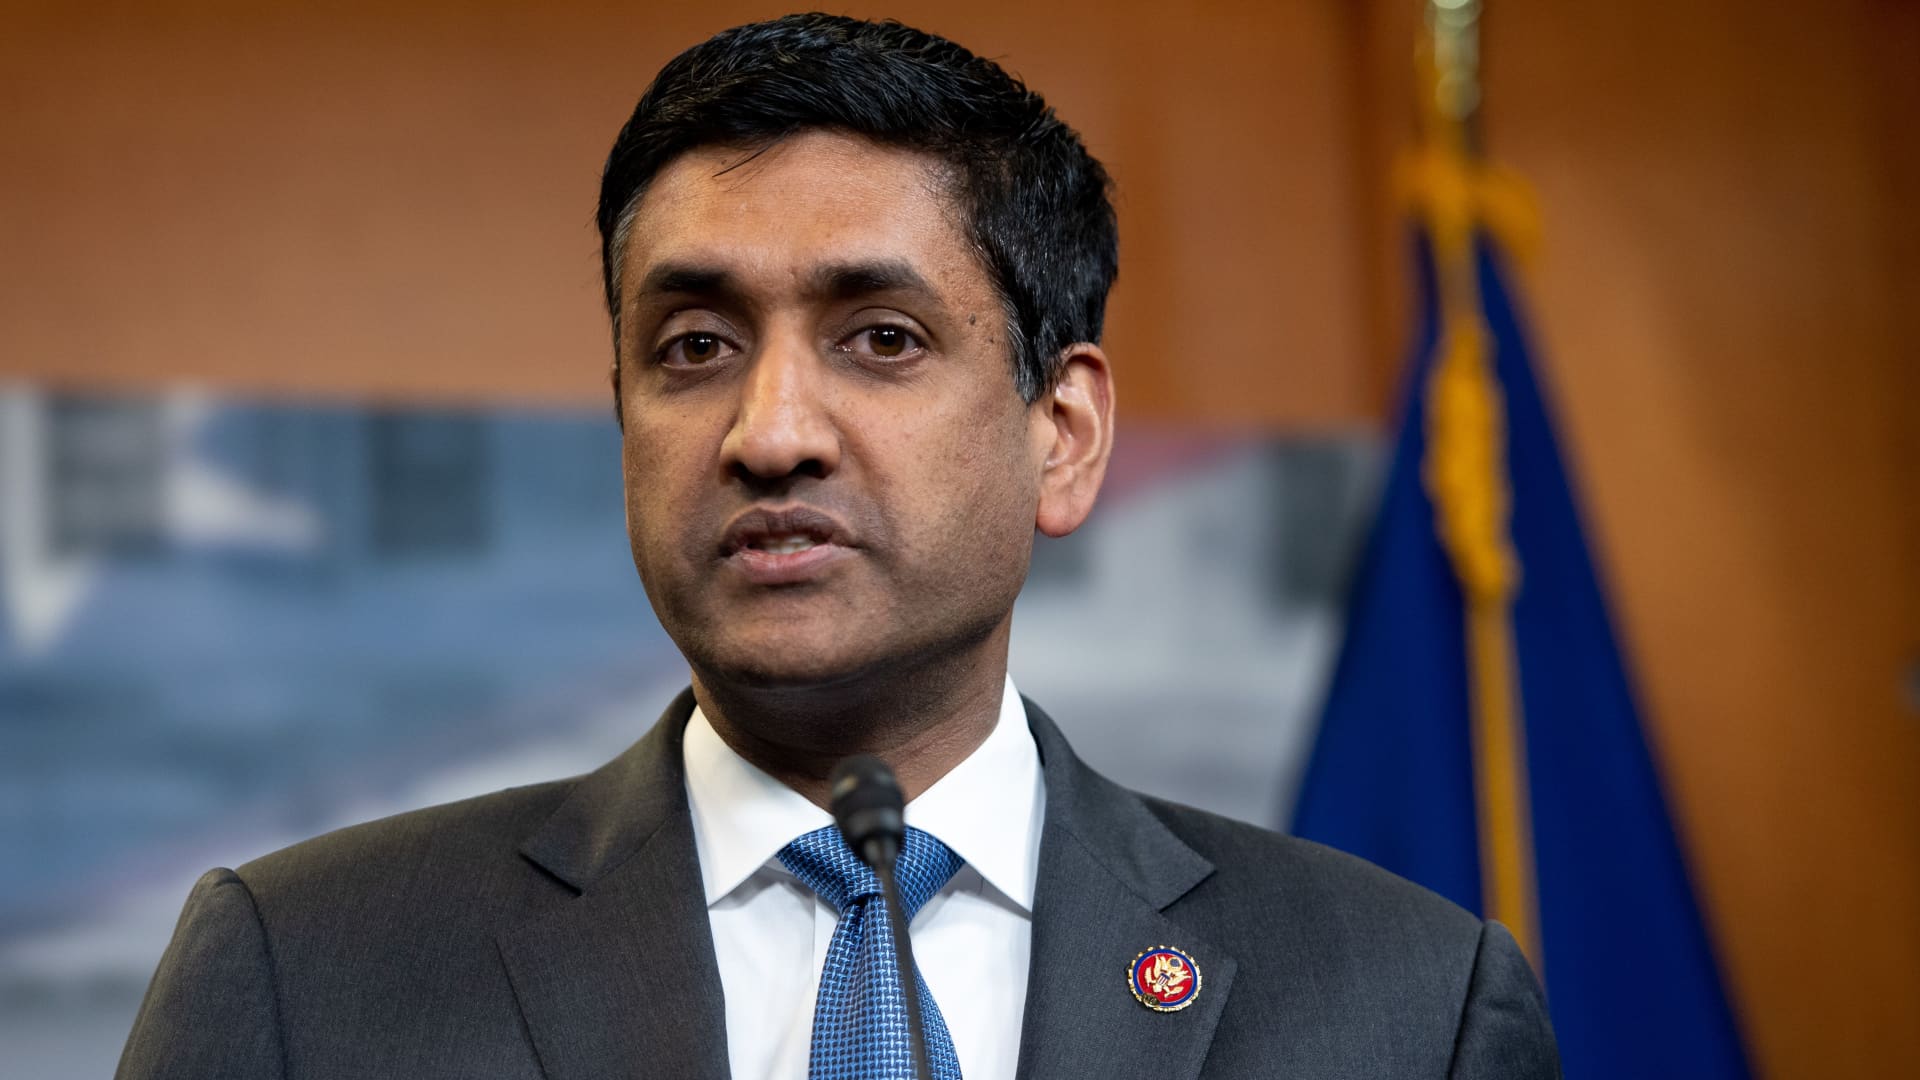 Twitter will have a ‘hard time’ keeping Trump off if he runs in 2024, says Rep. Khanna